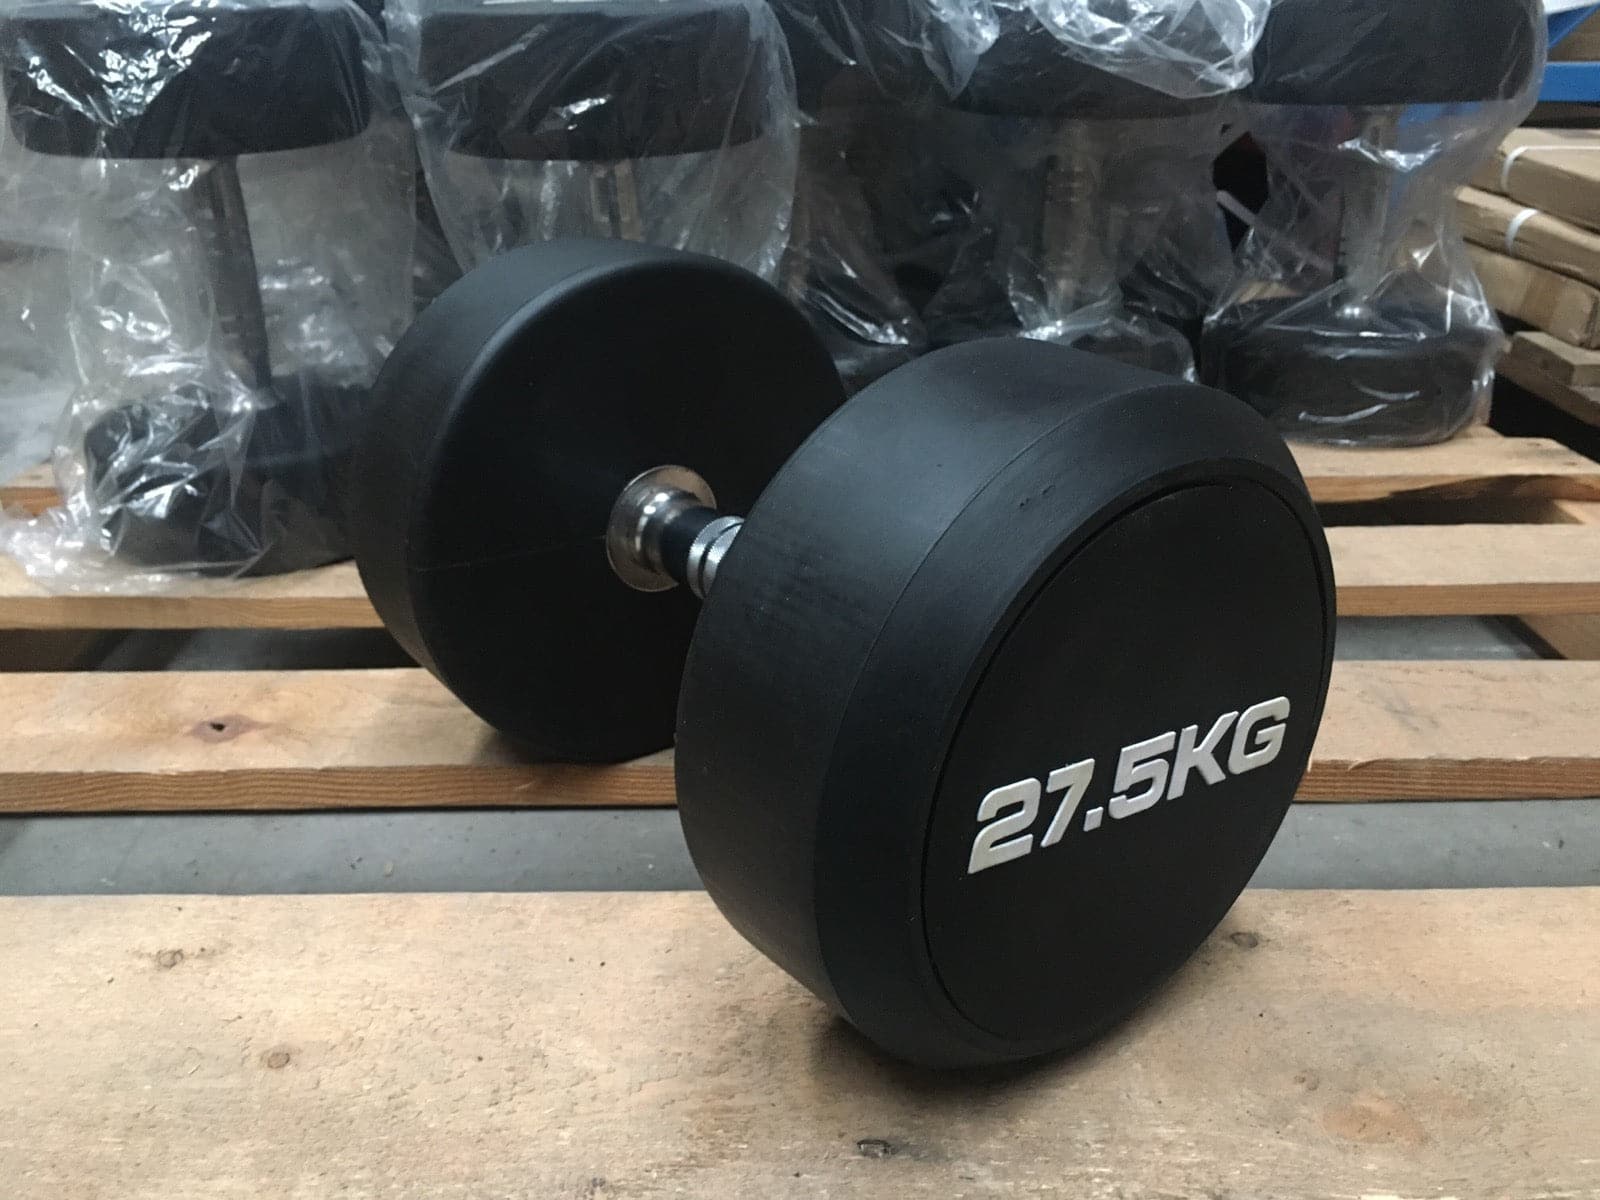 CLEARANCE - Black PU Rubber-Coated Commercial Dumbbells, Sold in Pairs (Style 2)